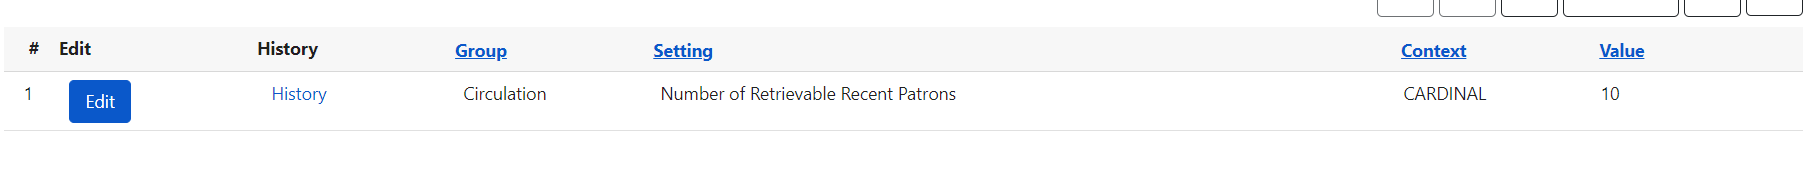 Library Settings Editor with "Number of  Retrievable Recent Patrons" set to 10.